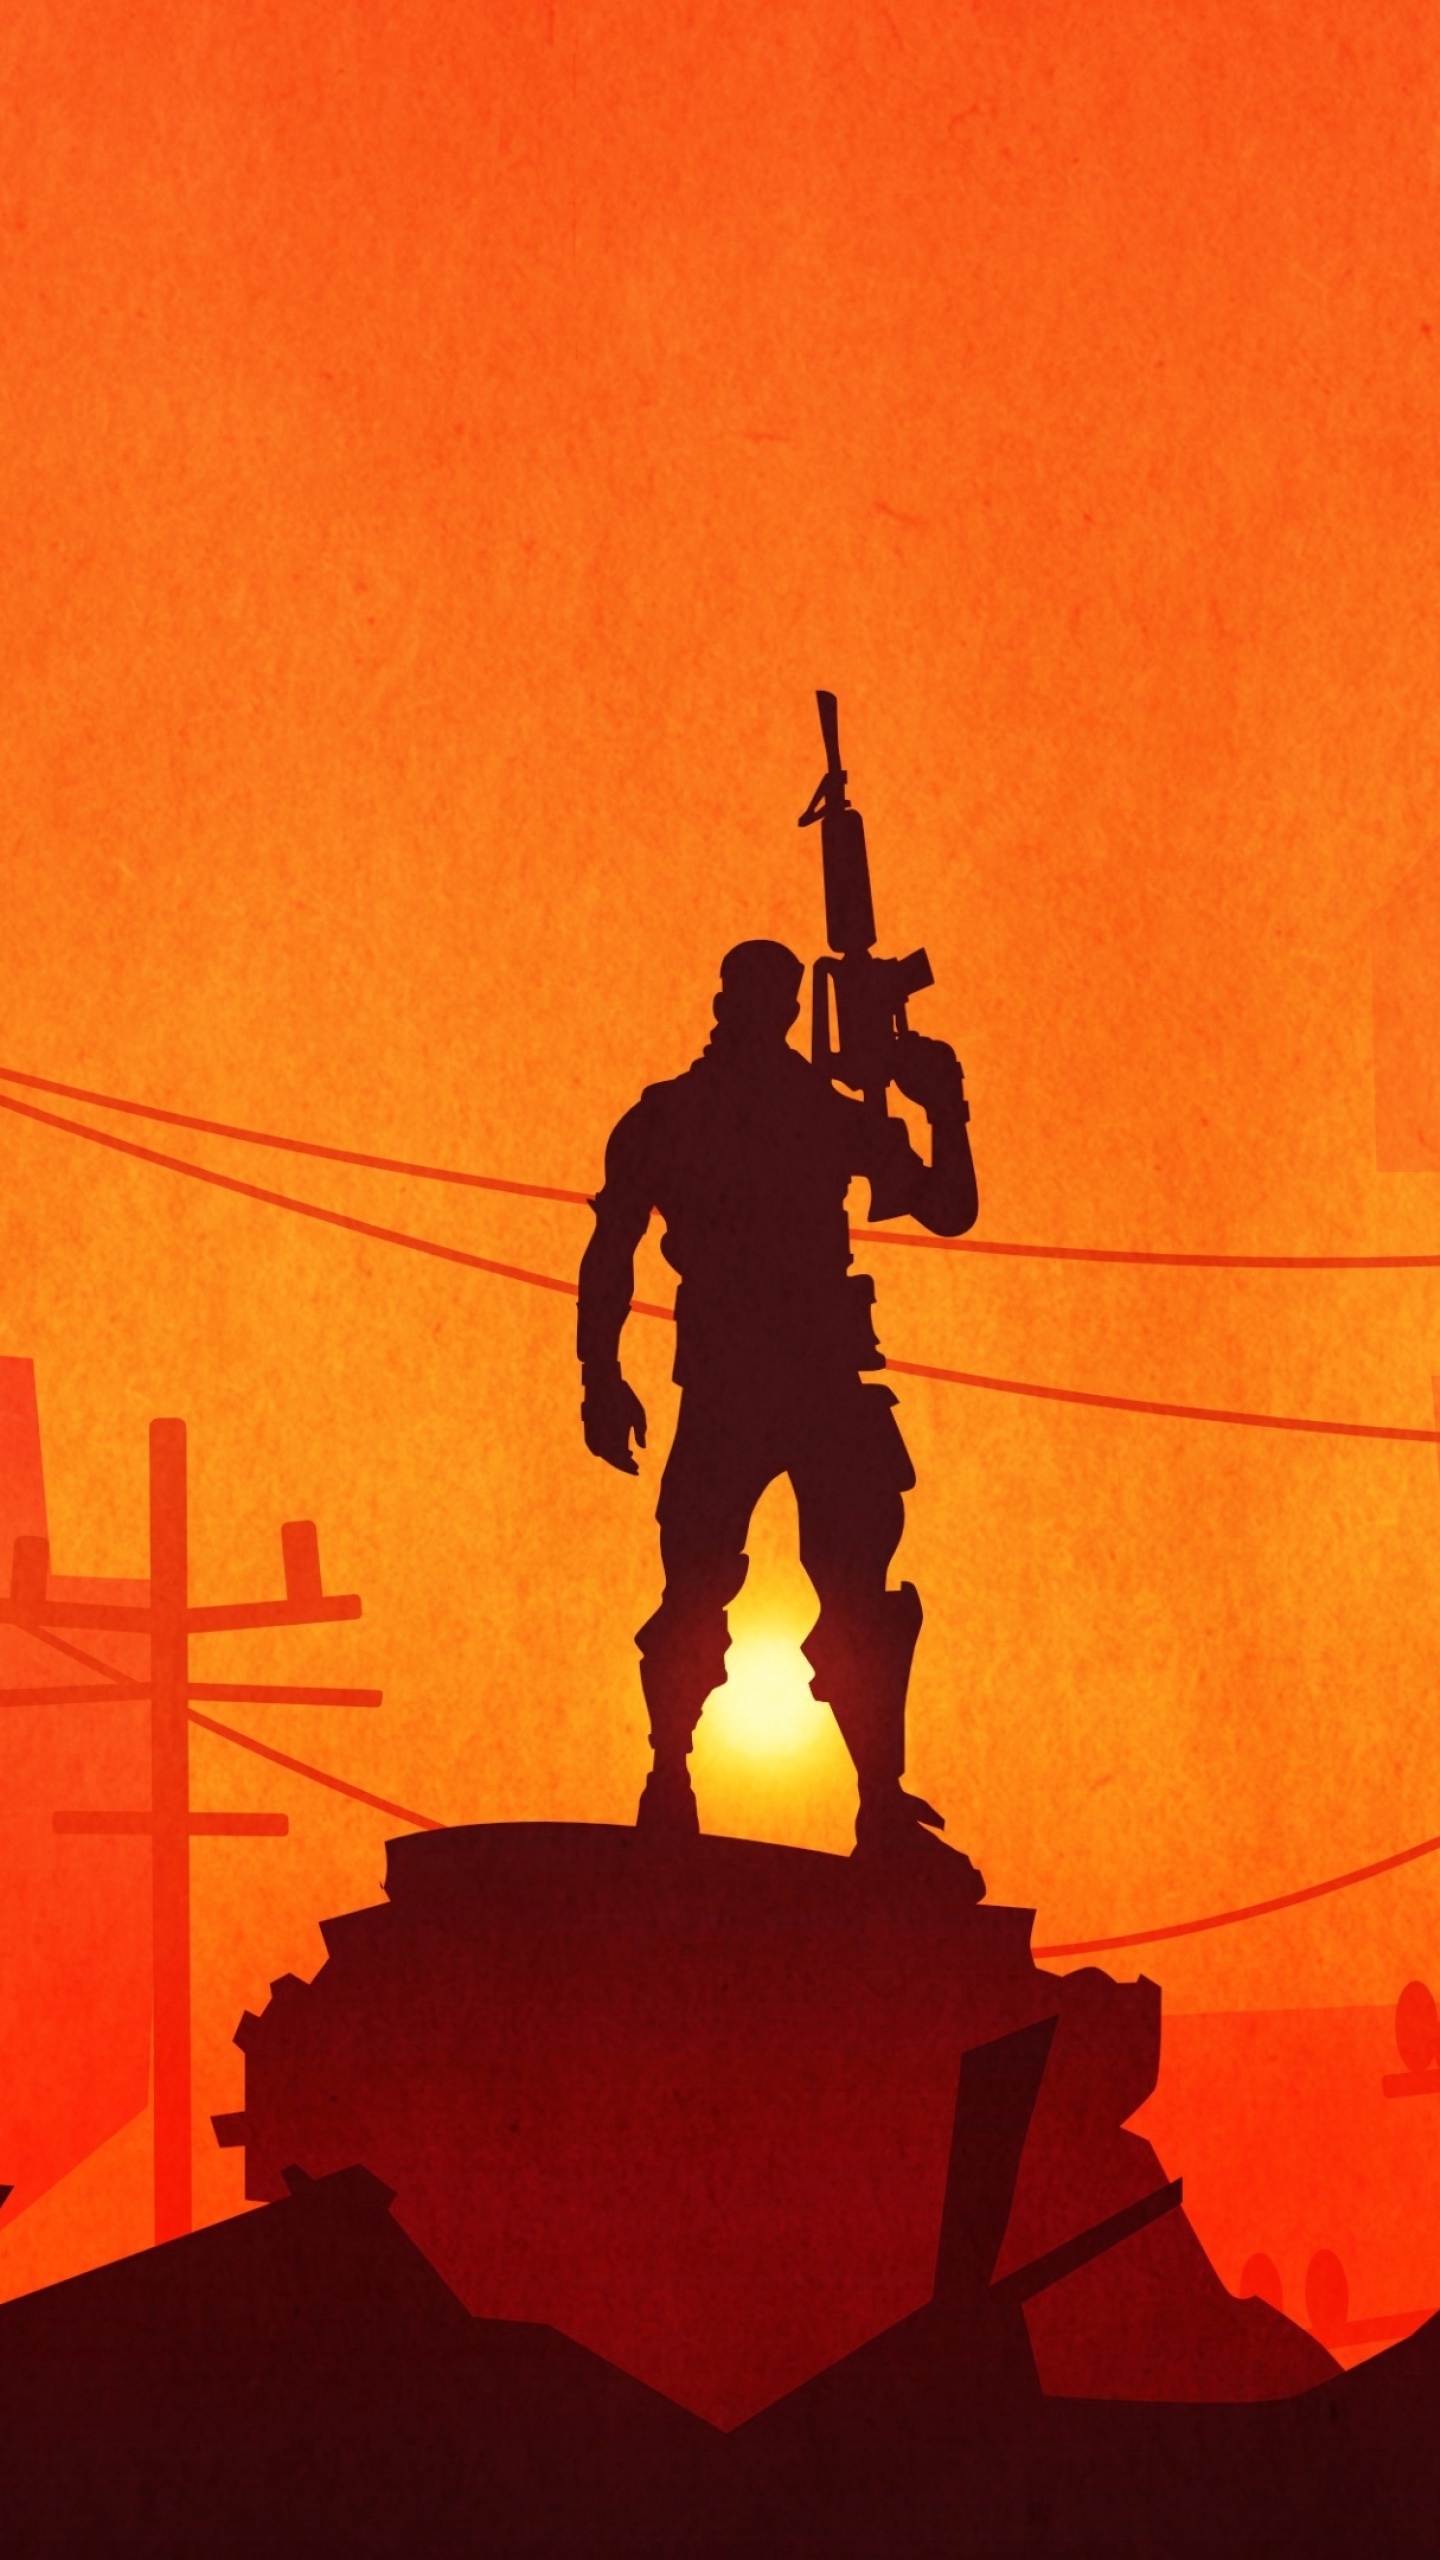 Download Fortnite Warrior Silhouette In Sunset 1600x900 ...